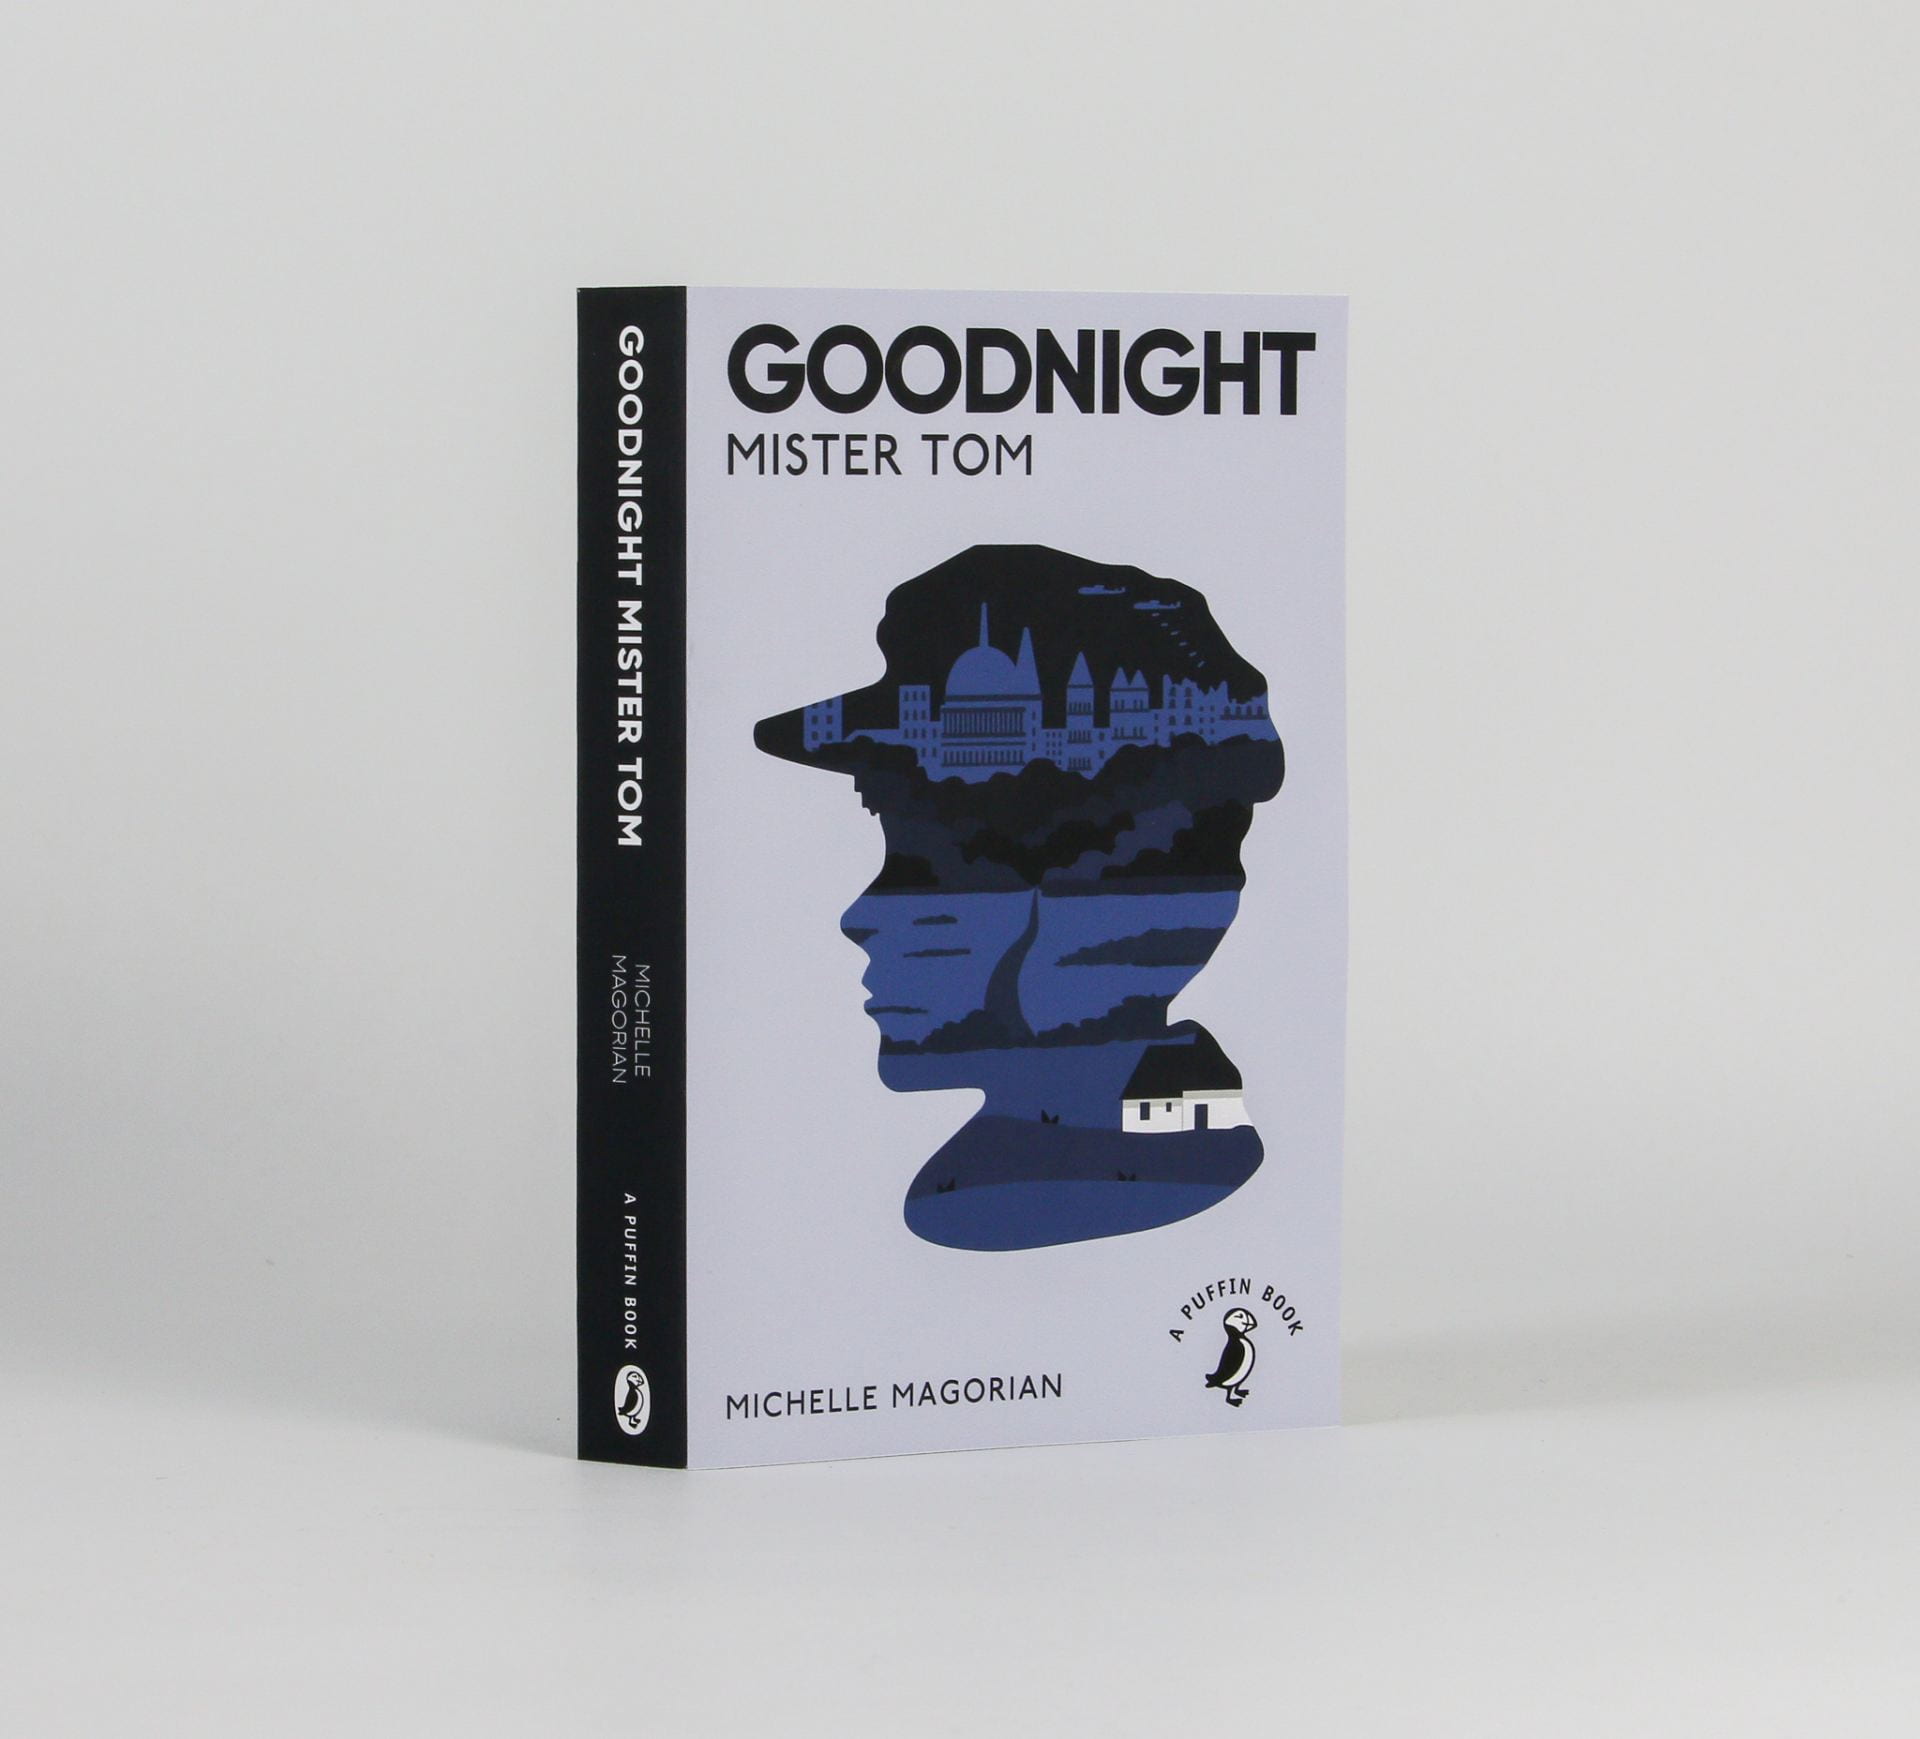 Book cover reading 'Goodnight mister tom' with a silhouette of a boys head with the city inside